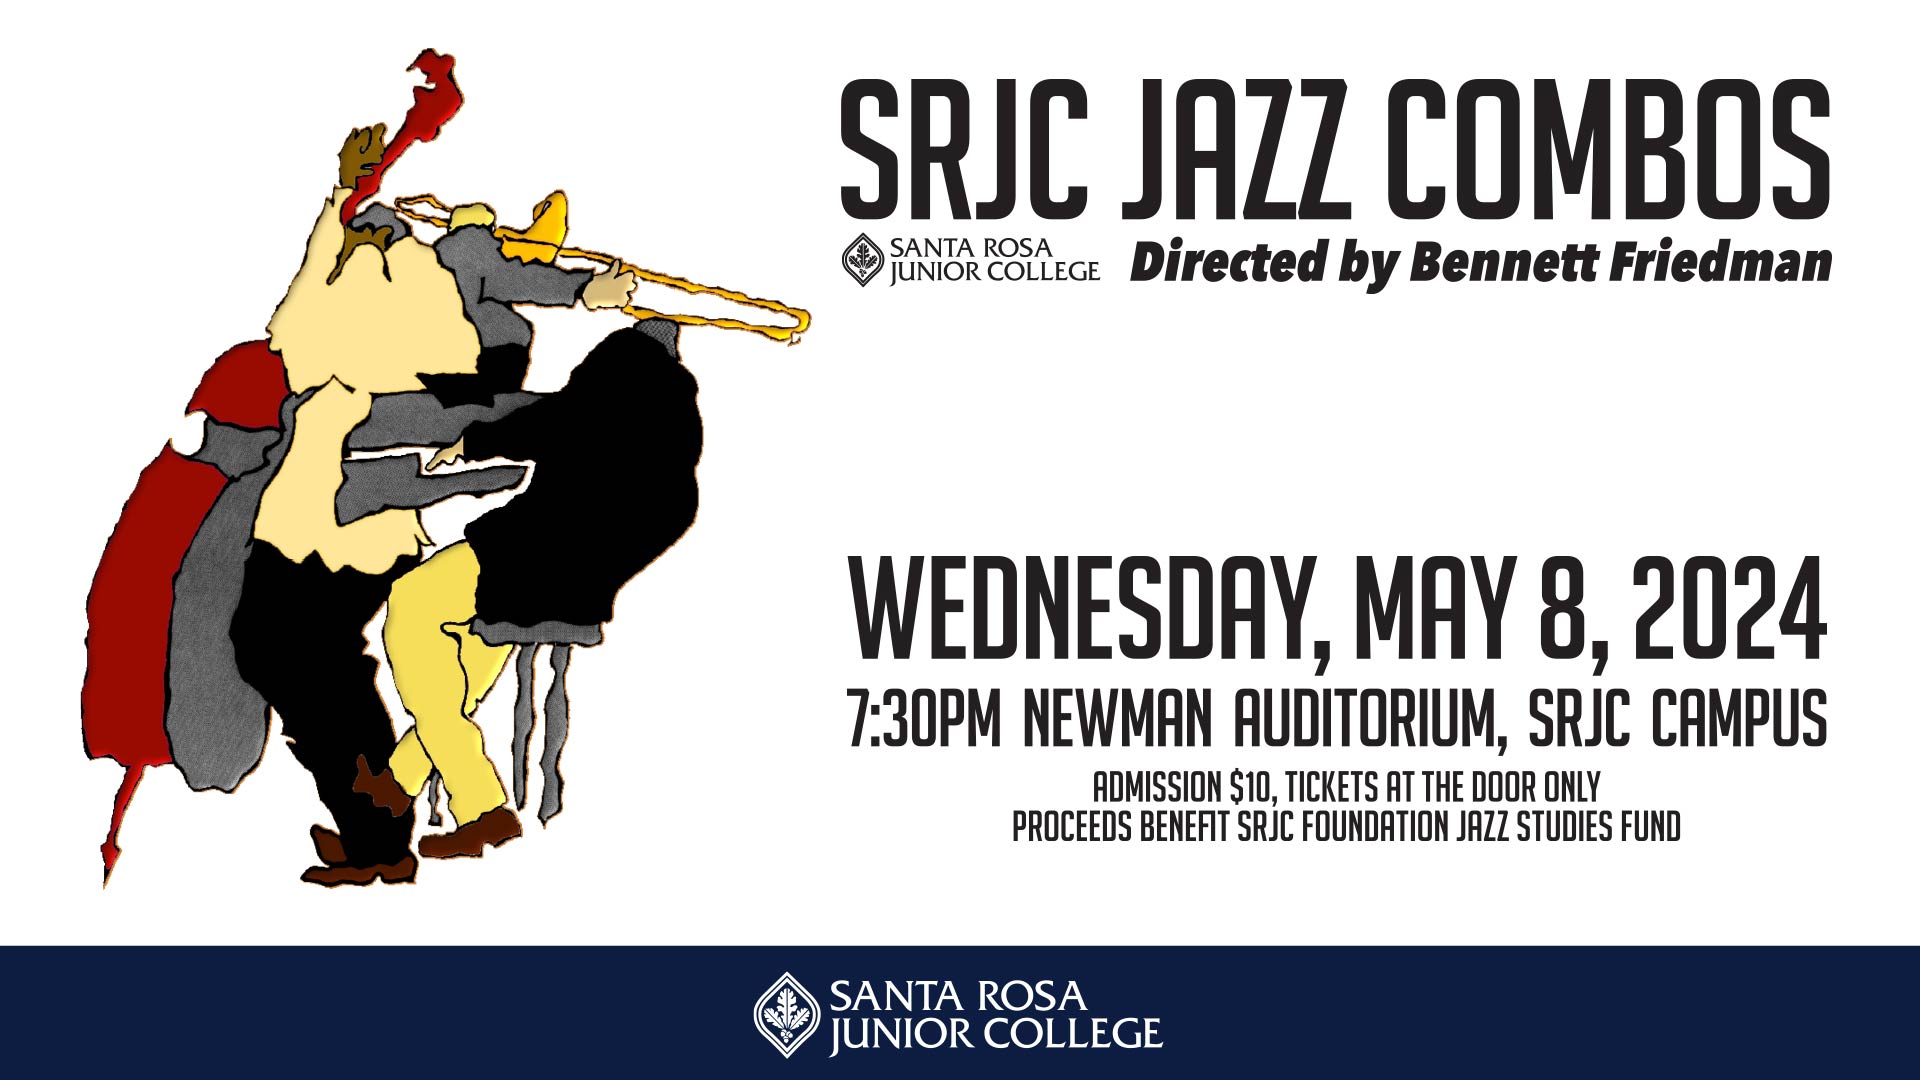 SRJC Jazz Combos Directed by Bennett Friedman Wednesday, May 08, 2024 7:30pm Newman Auditorium, SRJC Campus Admission $10, Tickets at the door only proceeds benefit SRJC Foundation Jazz Studies Fund